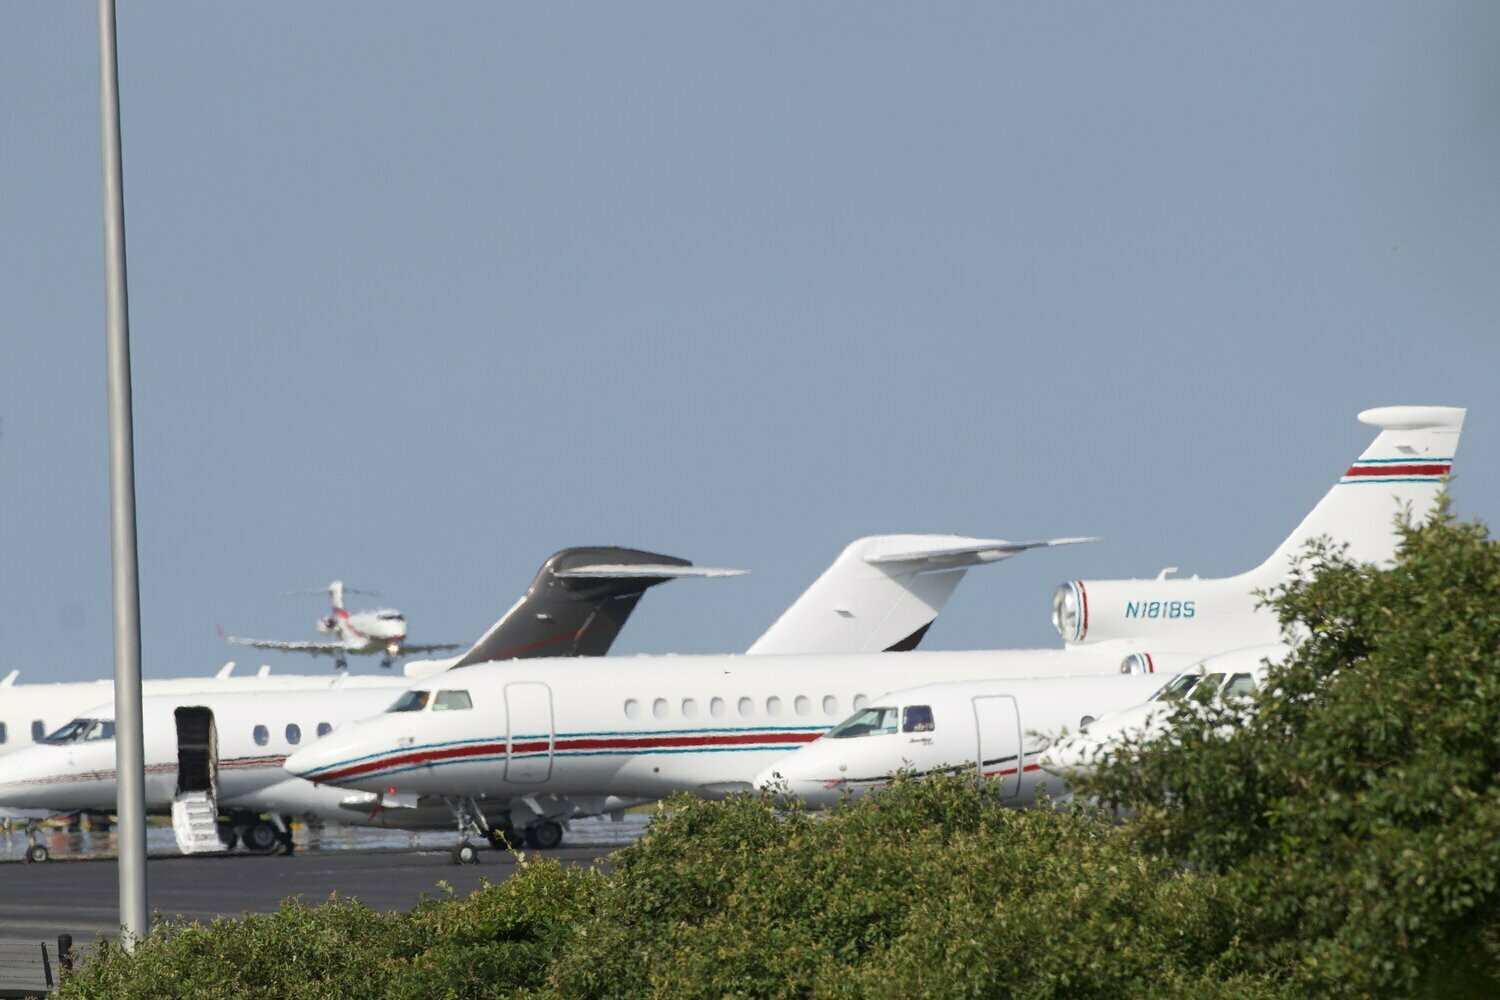 Private jets lined up on the tarmac at Nantucket Memorial Airport this summer as another approaches for landing.